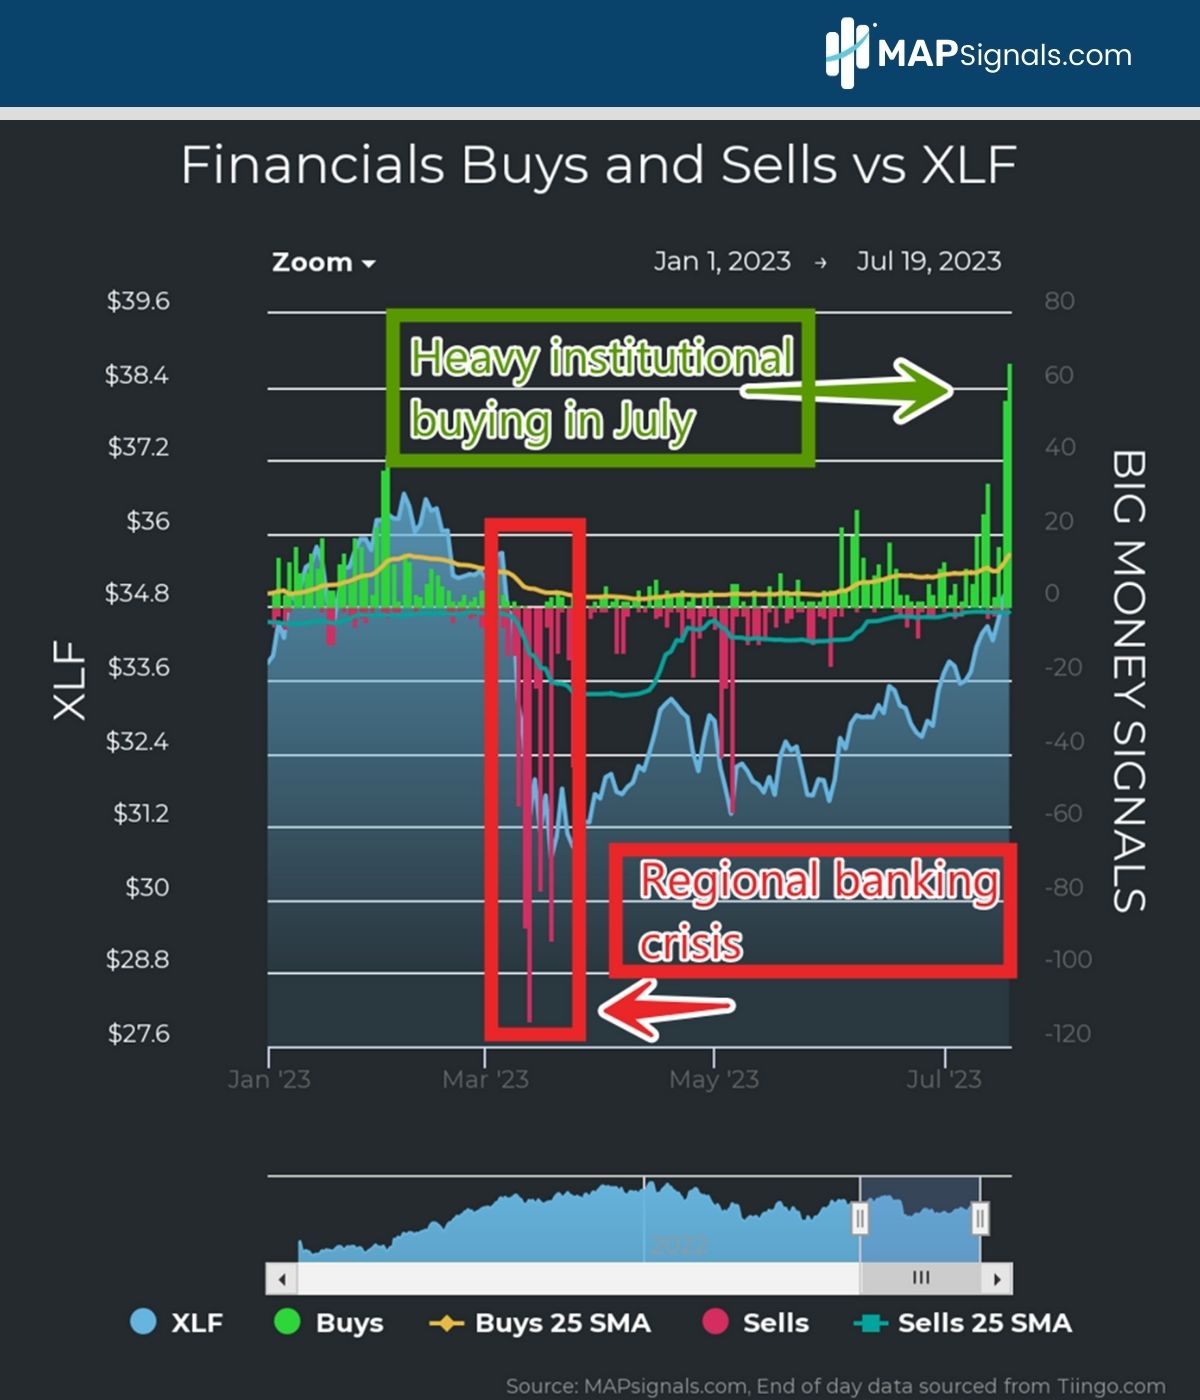 Heavy Institutional Buying in July 2023 | Financials Buys & Sells vs XLF | MAPsignals